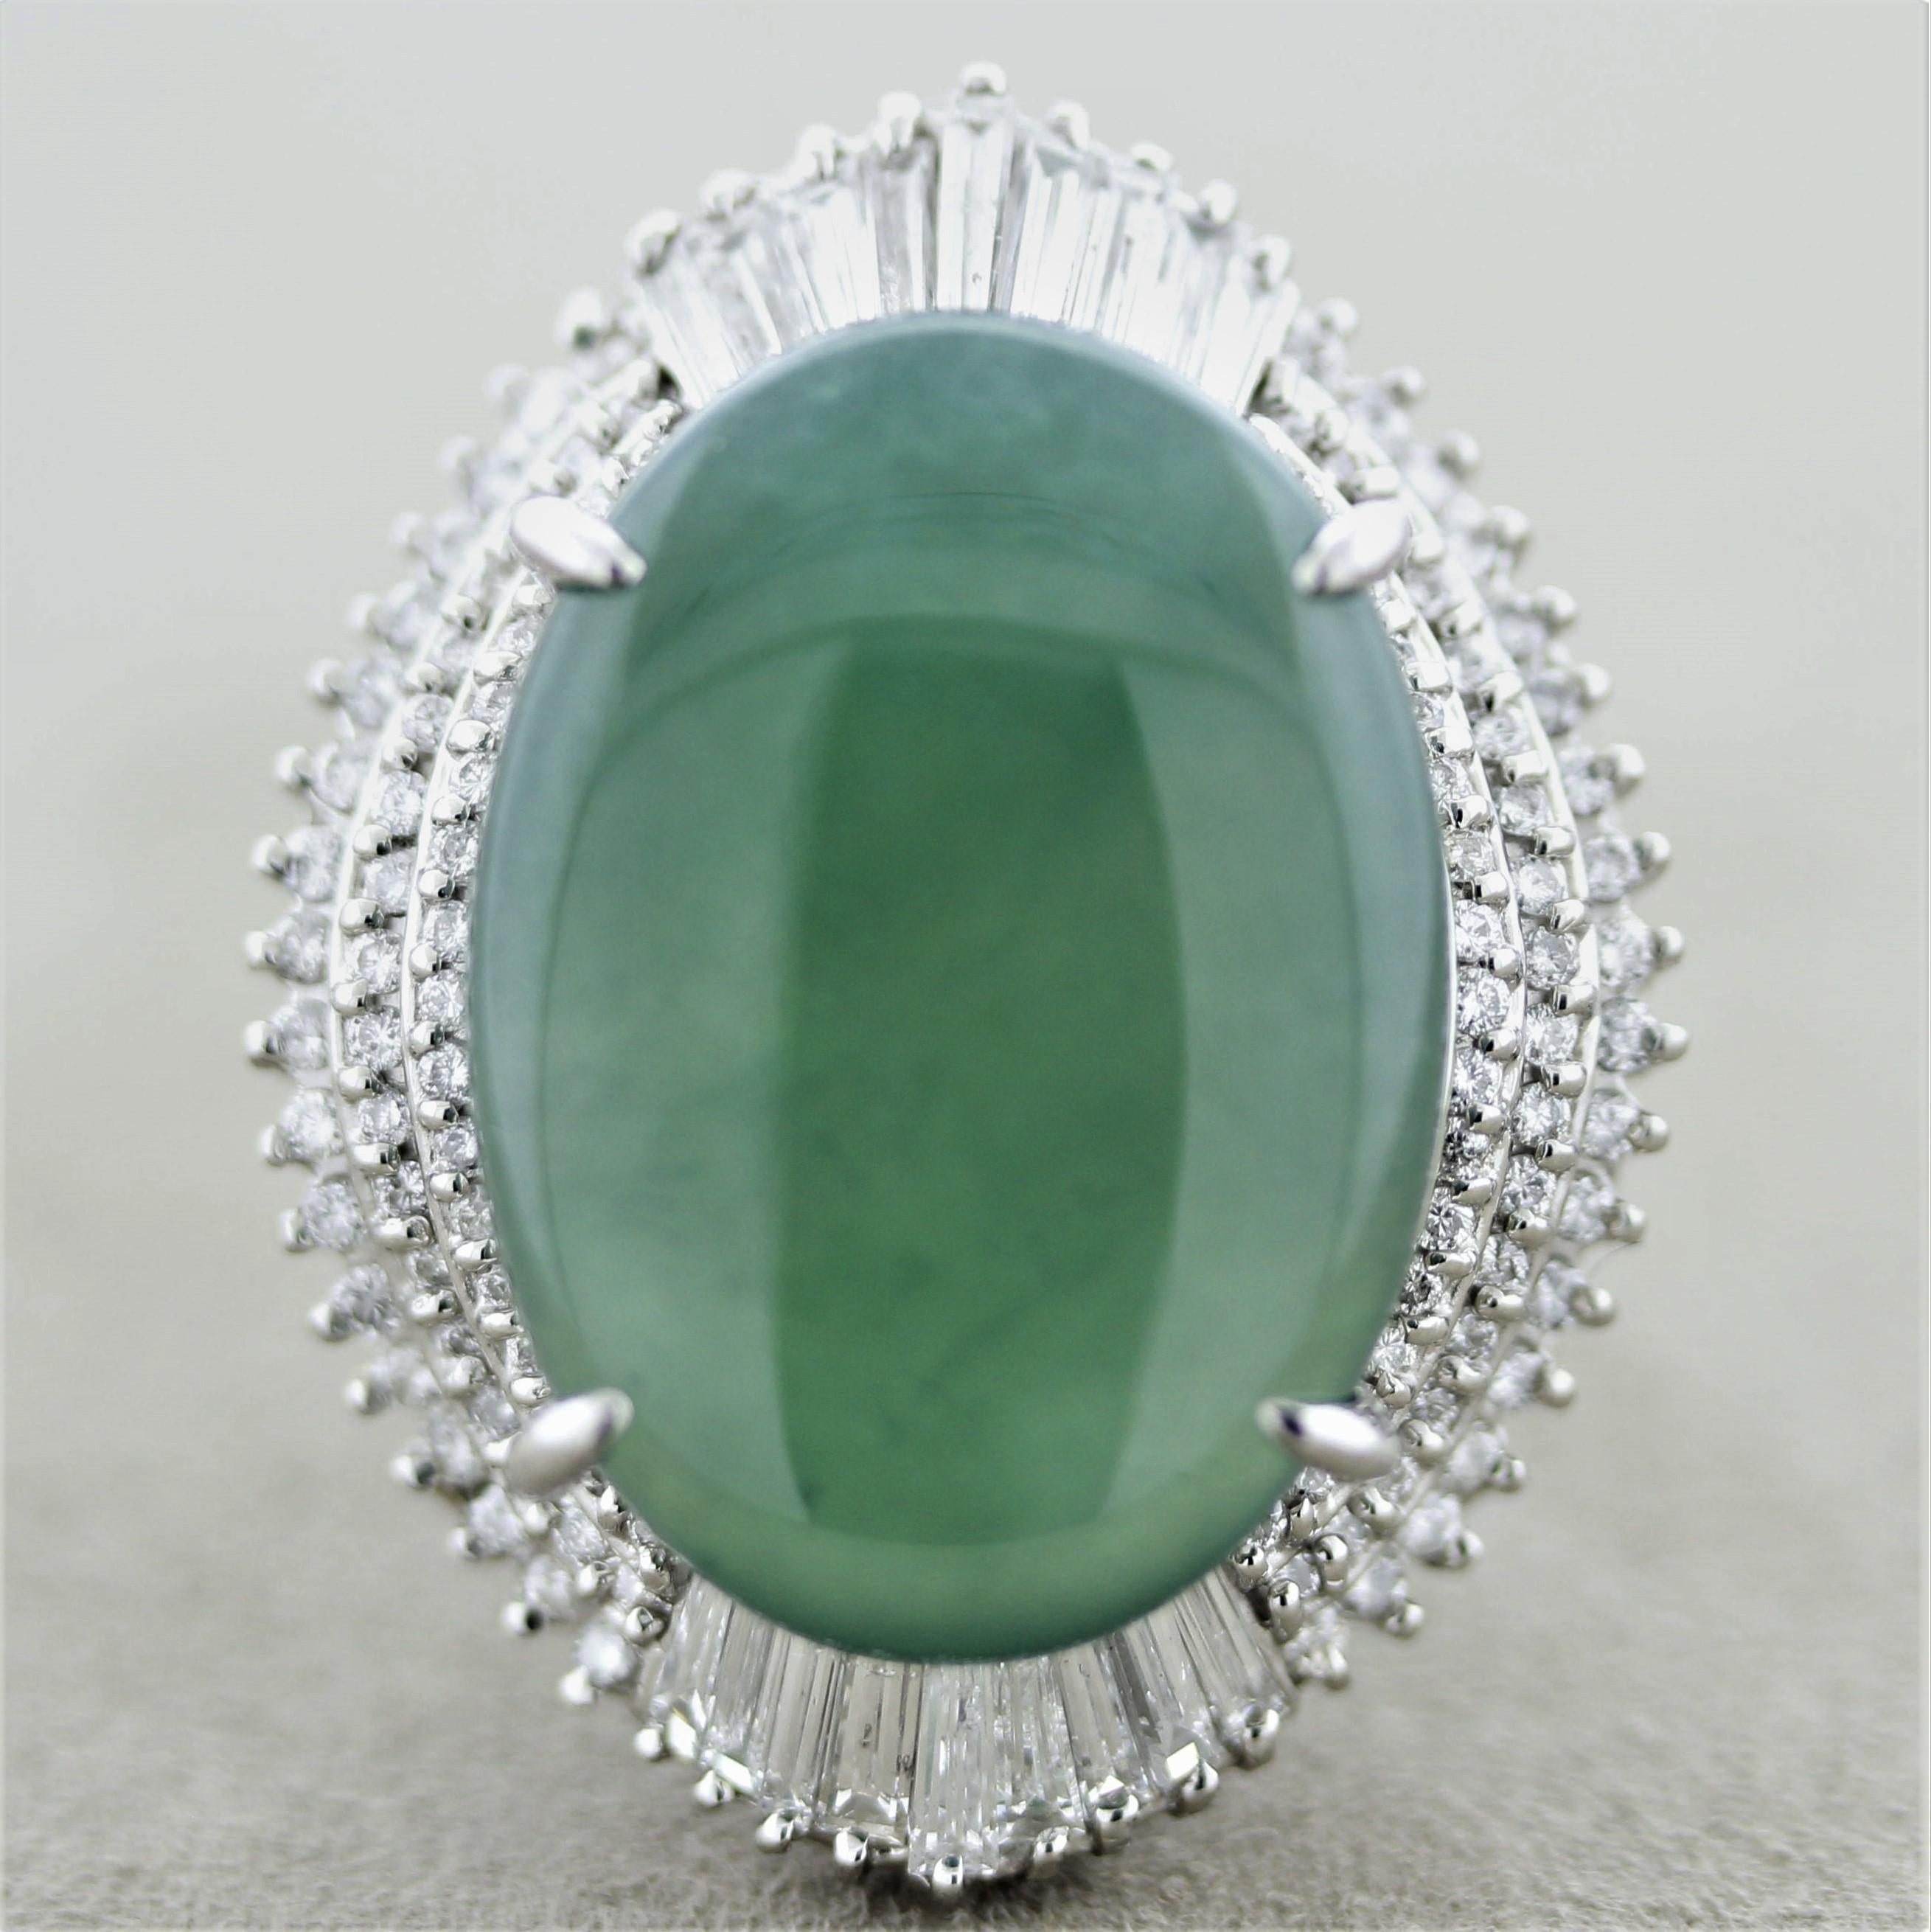 A substantial and bold ring featuring a natural 23.22 carat jadeite jade. It has an even green color and is semi-translucent allowing light to emanate from the stone. It is accented by 3.46 carats of round and baguette-cut diamonds set in a stylish